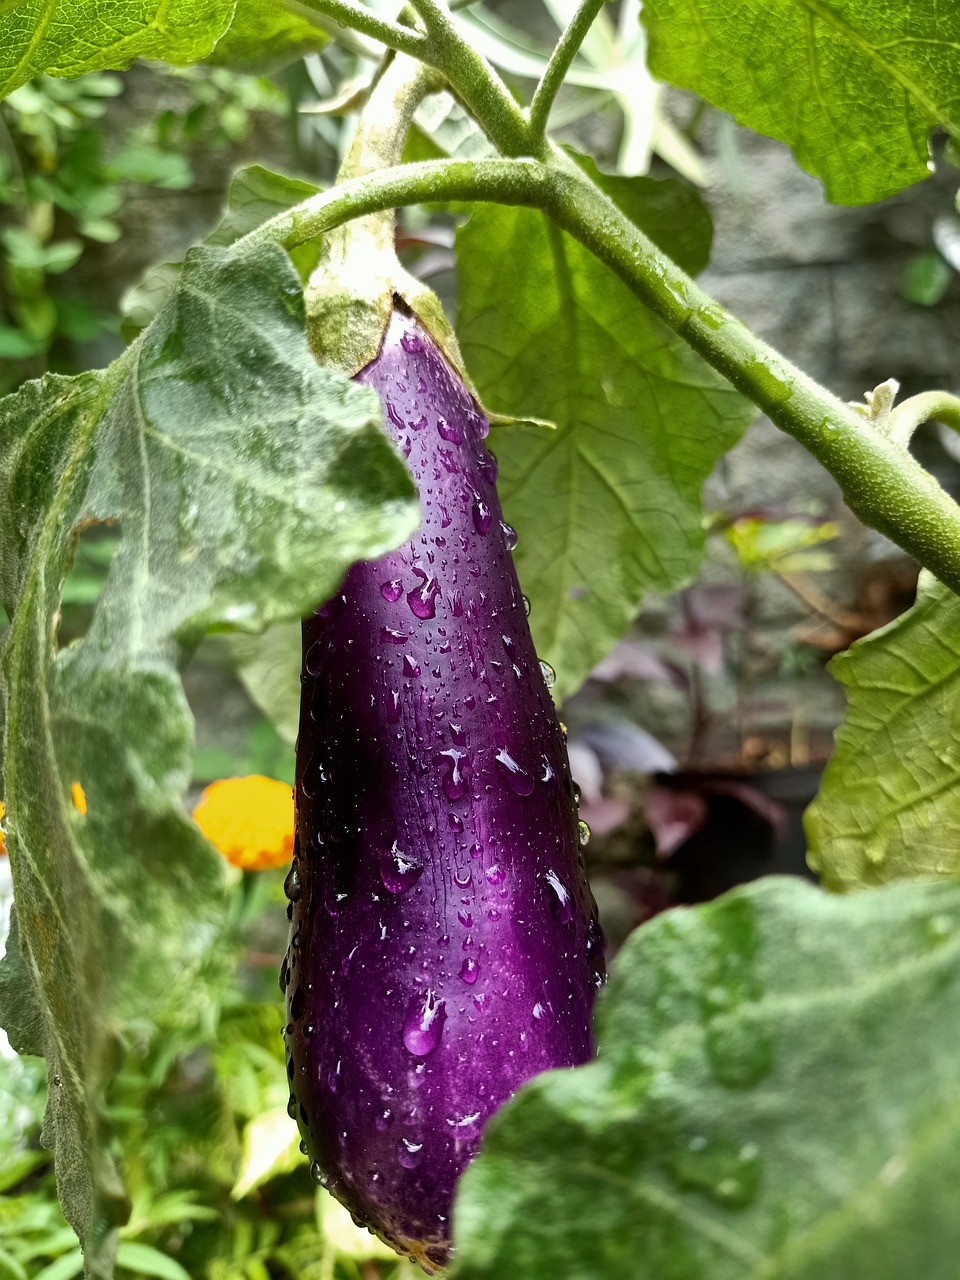 Eggplant benefits for male